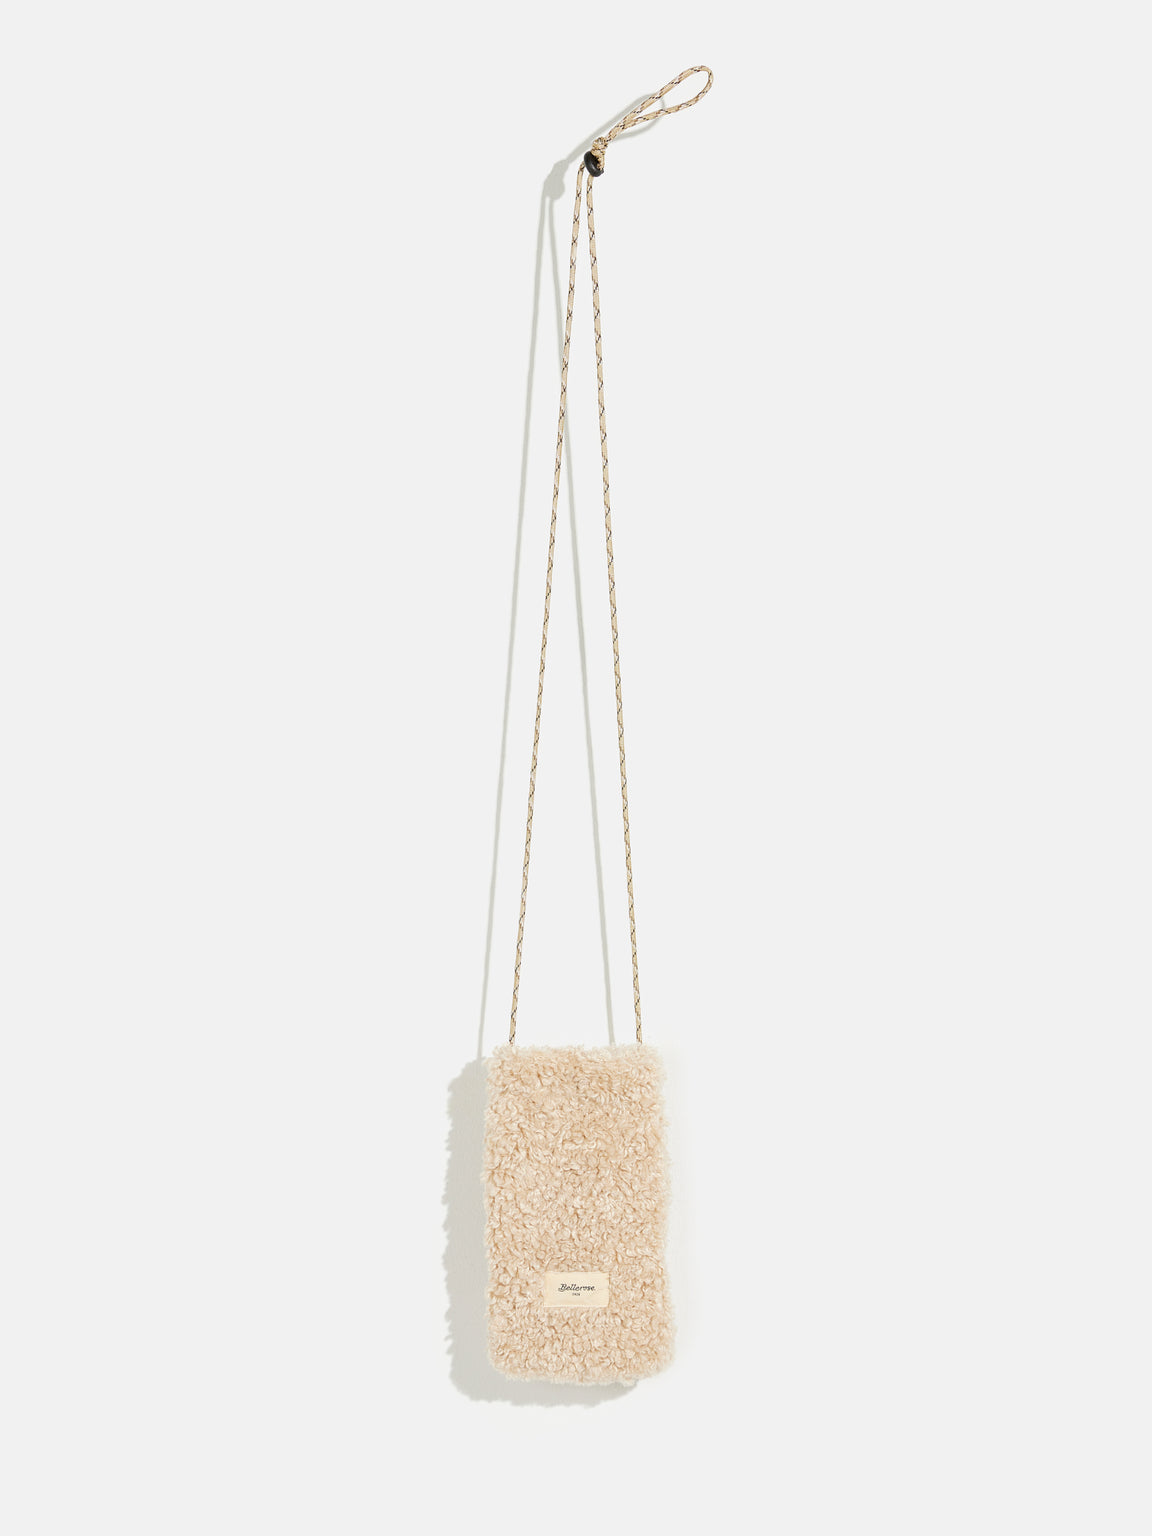 Hecho Phone Bag - White | Girls Collection | Bellerose